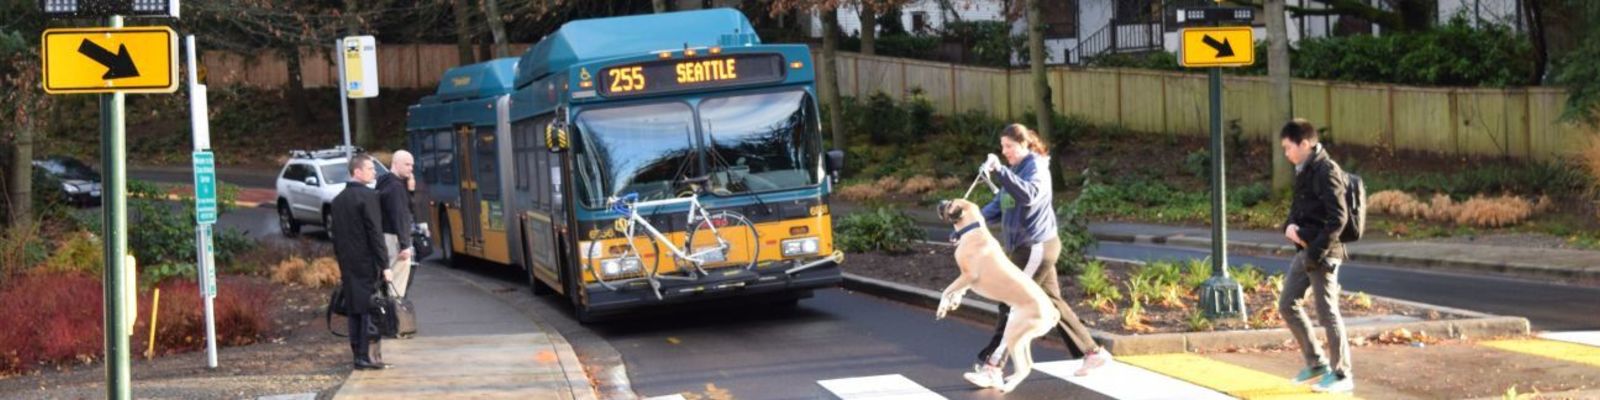 Image of people and a leashed dog in a mid-block crossing with bus waiting for them to pass